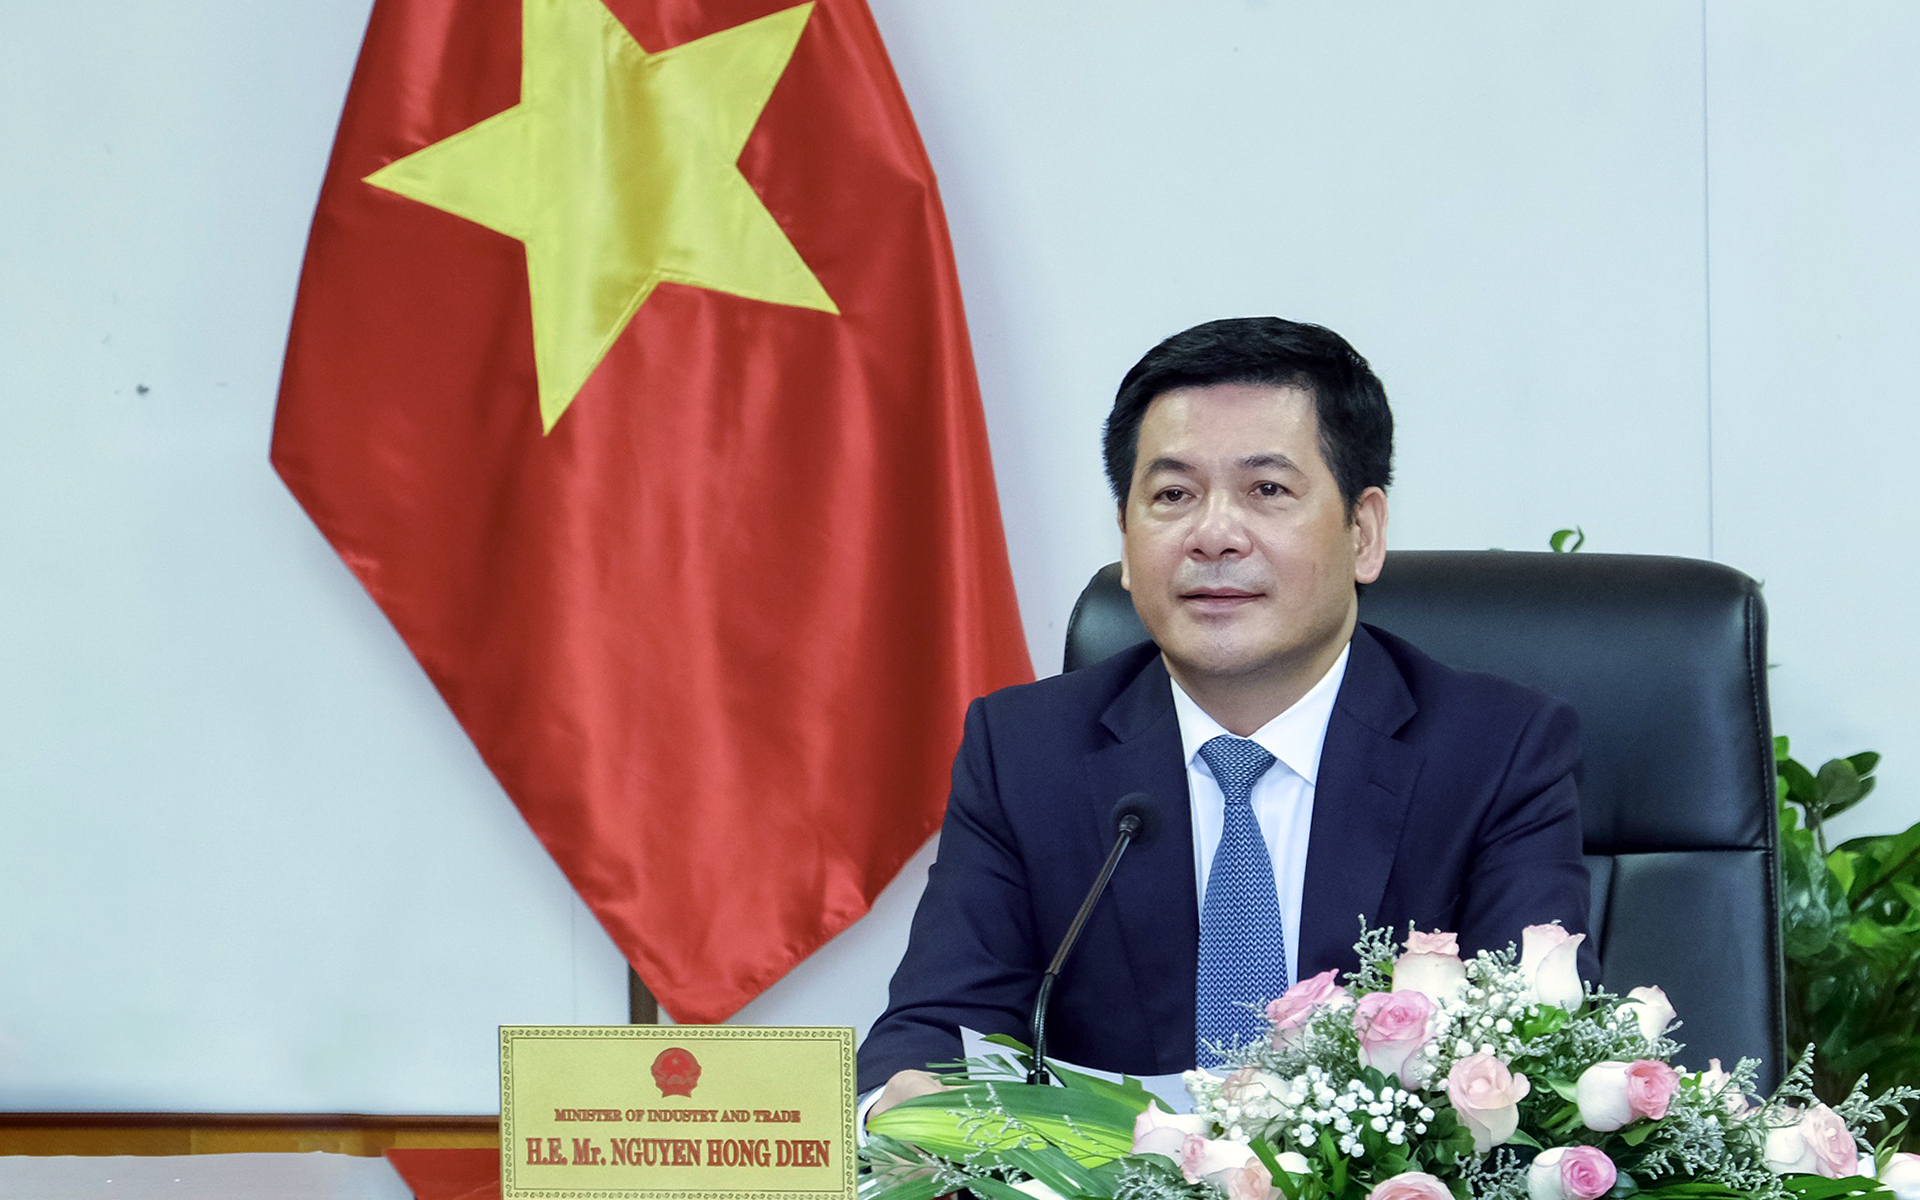 Minister Nguyen Hong Dien highly appreciated the participation of businesses in promoting Vietnam-United States cooperation.